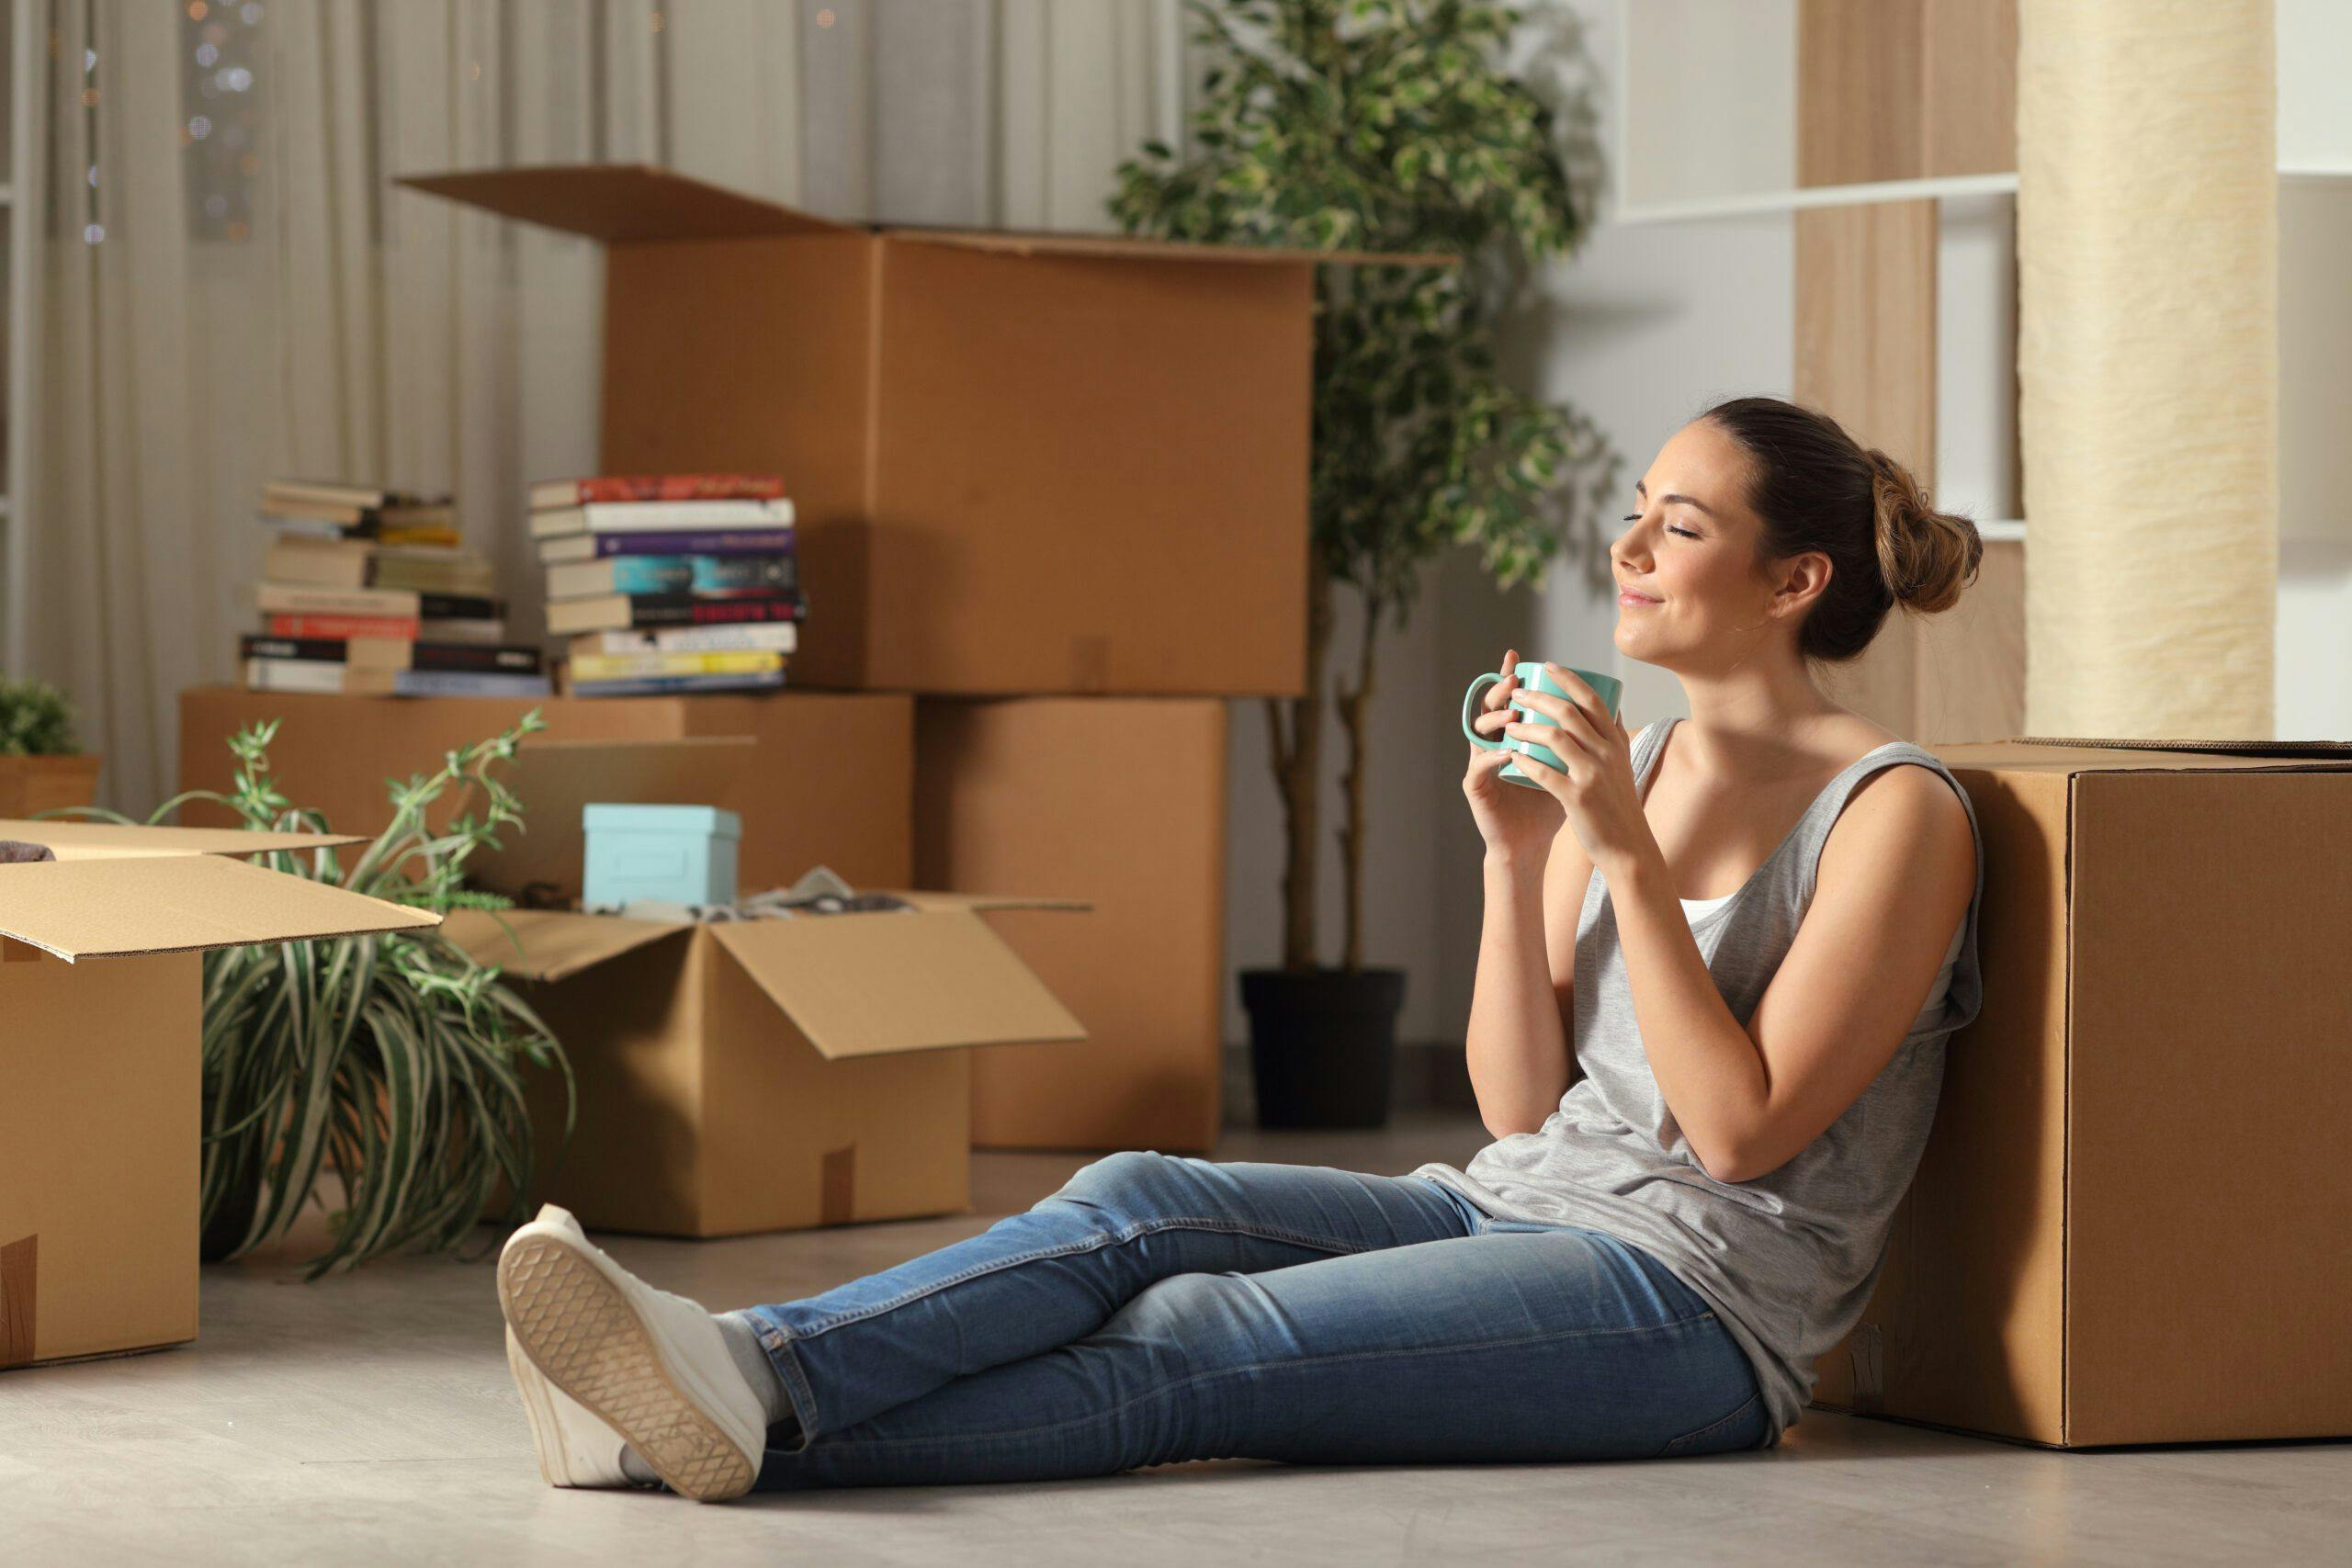 A woman surrounded by boxes, sitting on the floor, possibly during a move or organizing task.